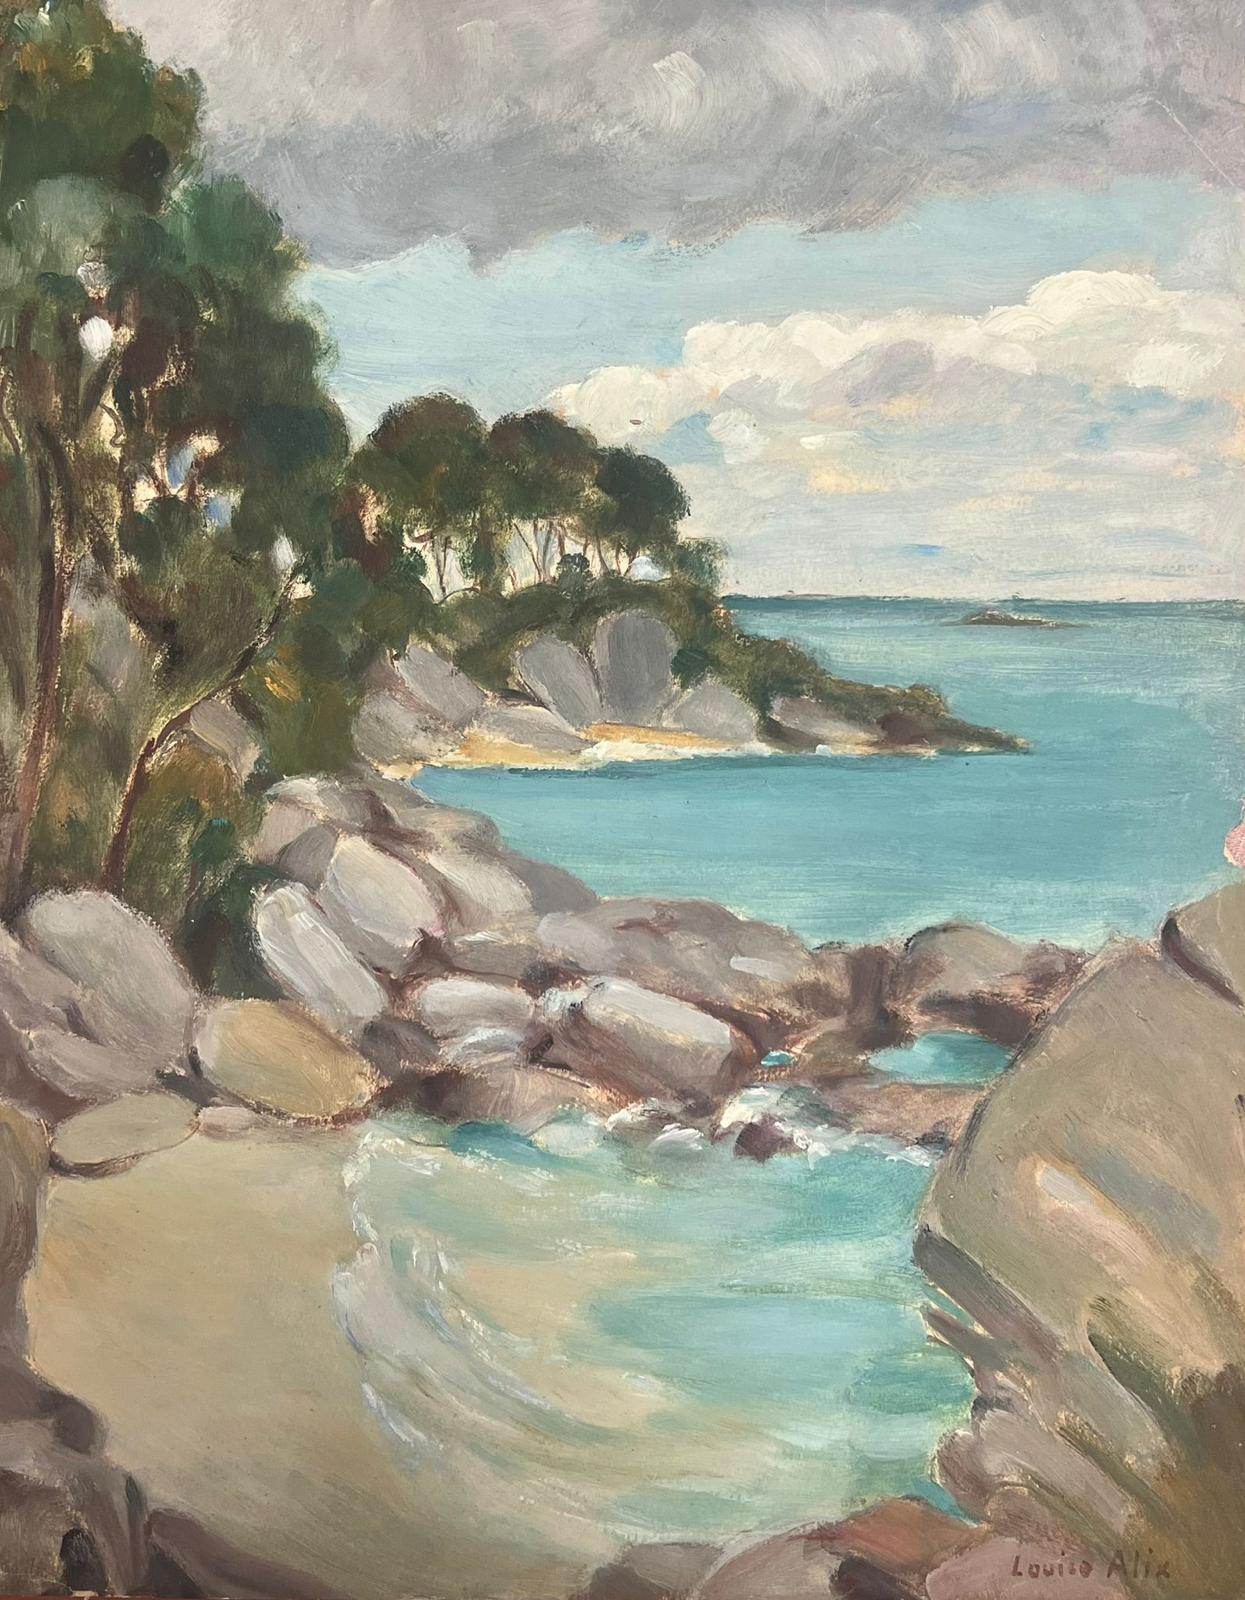 Louise Alix Landscape Painting - 1930's French Oil Painting Clear Sea Rocky Beach Bay Landscape